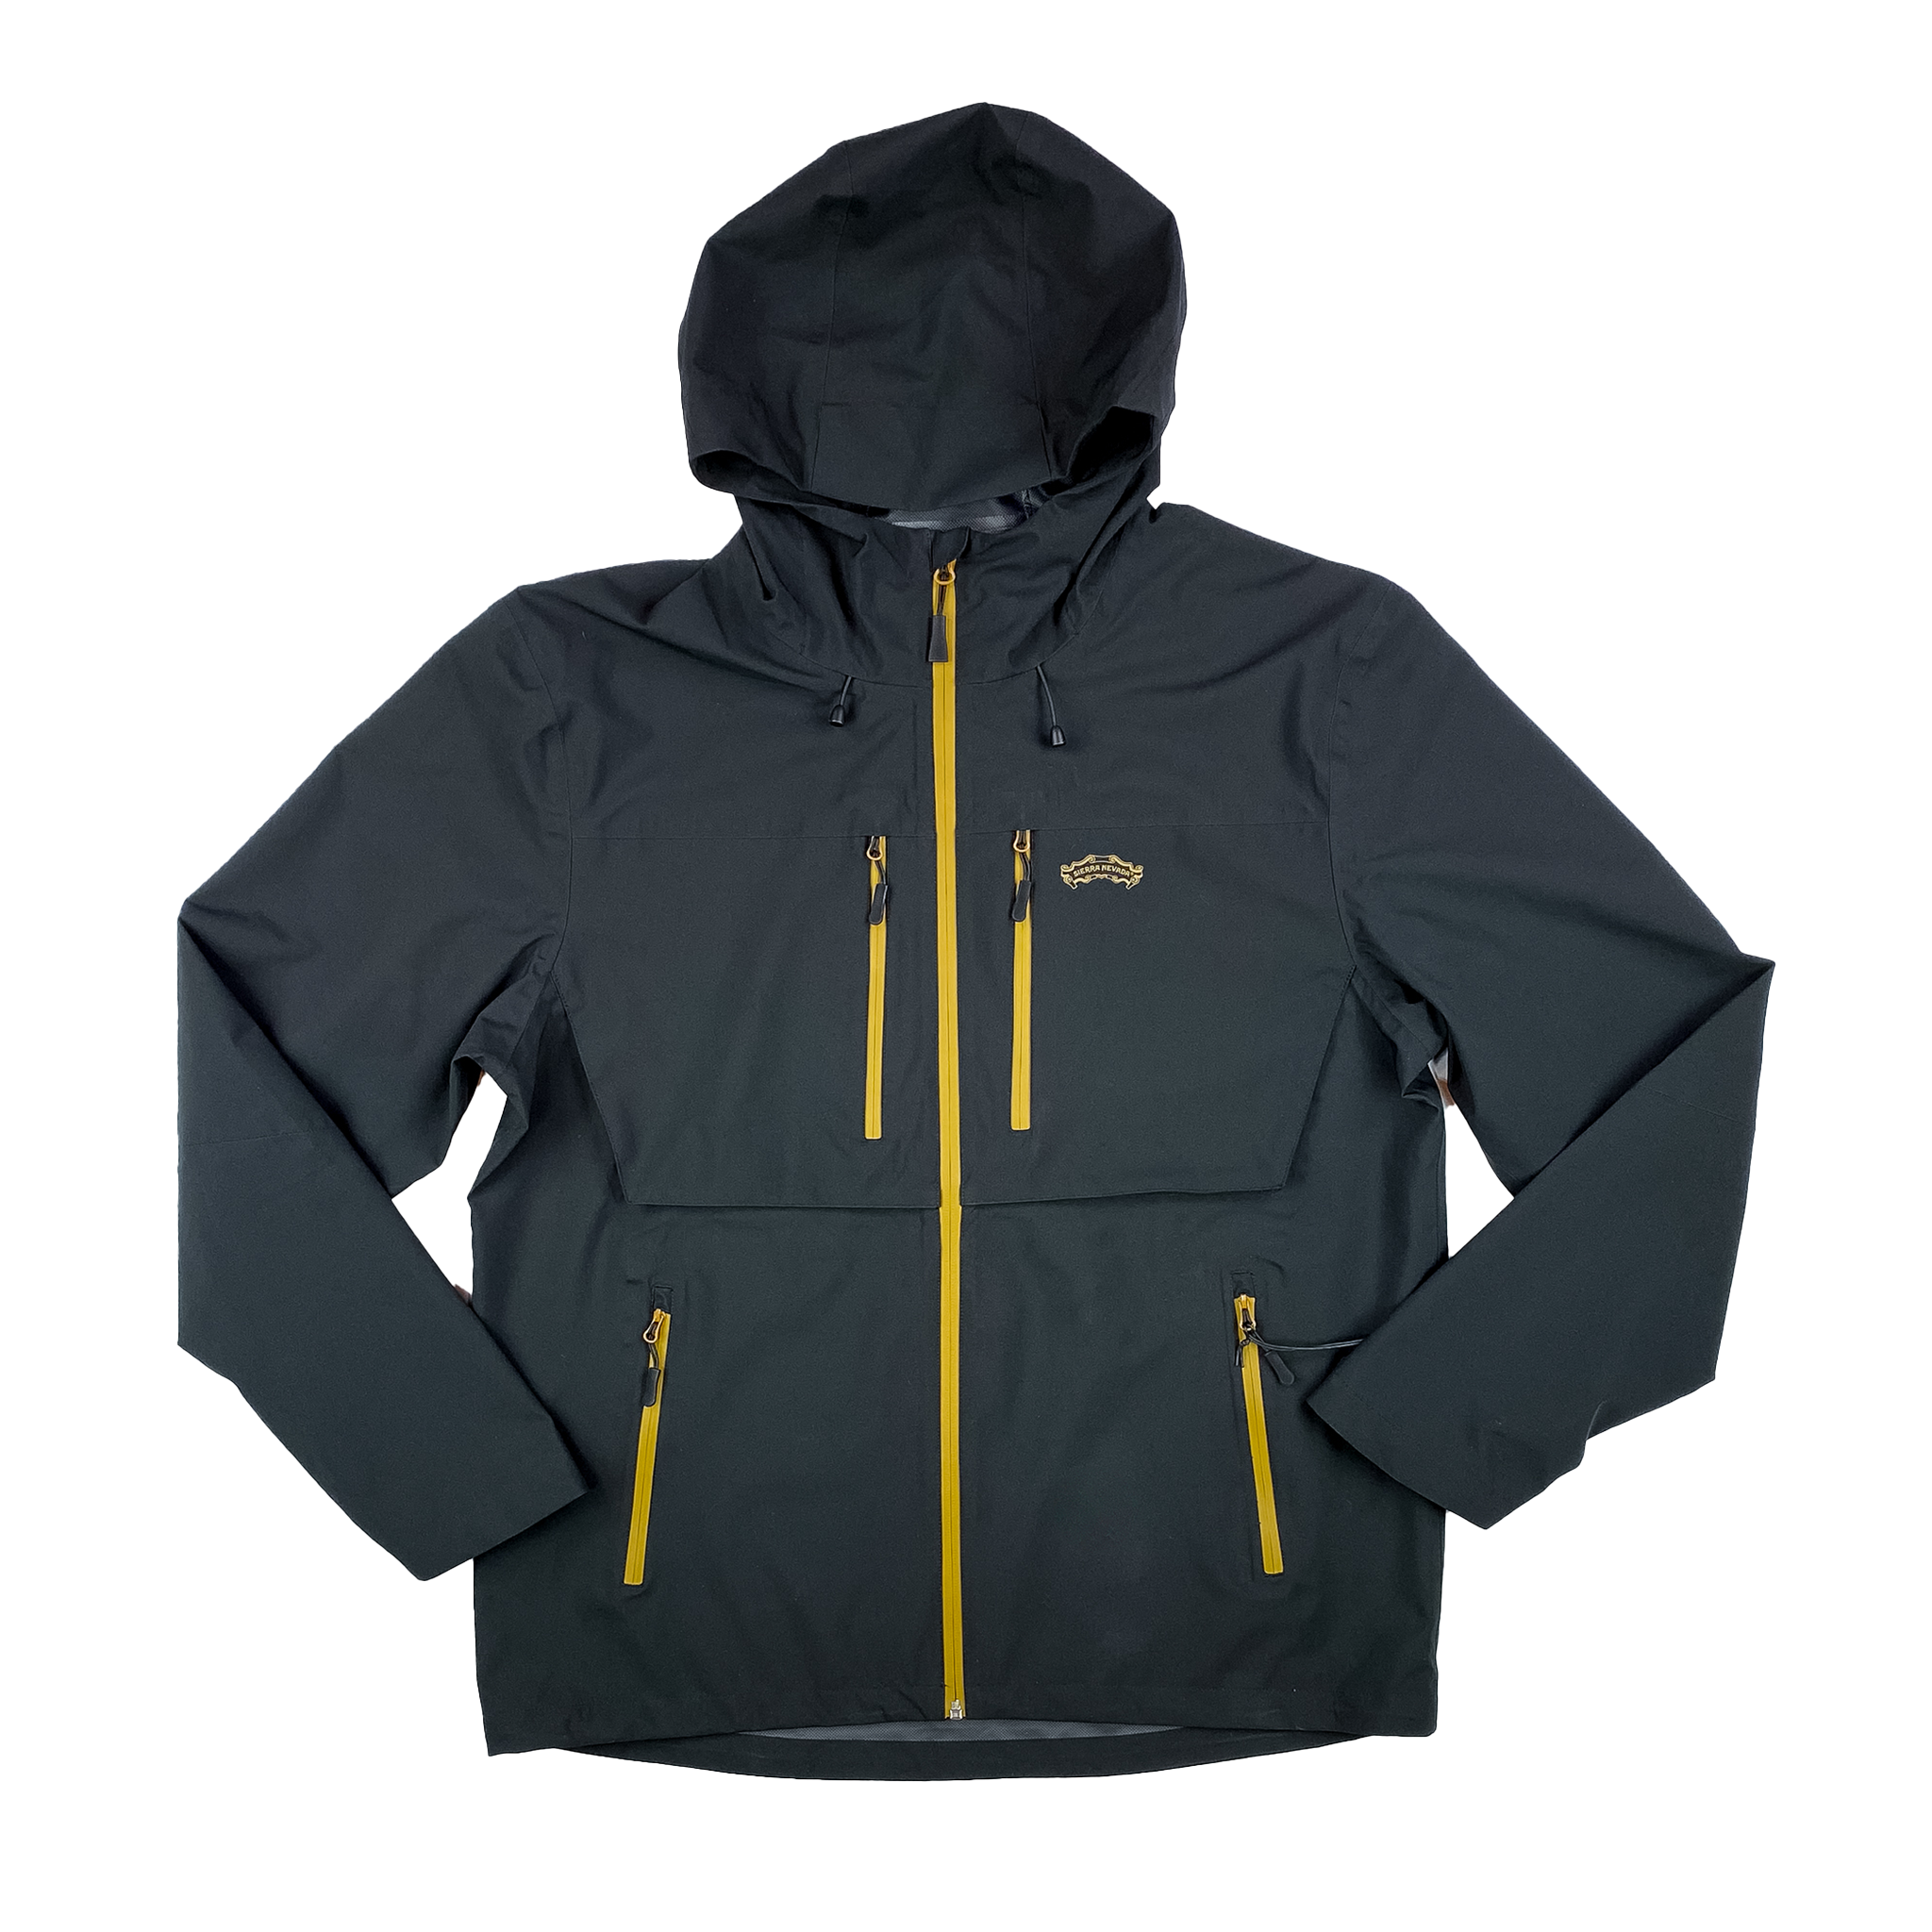 Sierra Nevada Brewing Co. Men's Rain Jacket - front view showing zipper and pockets